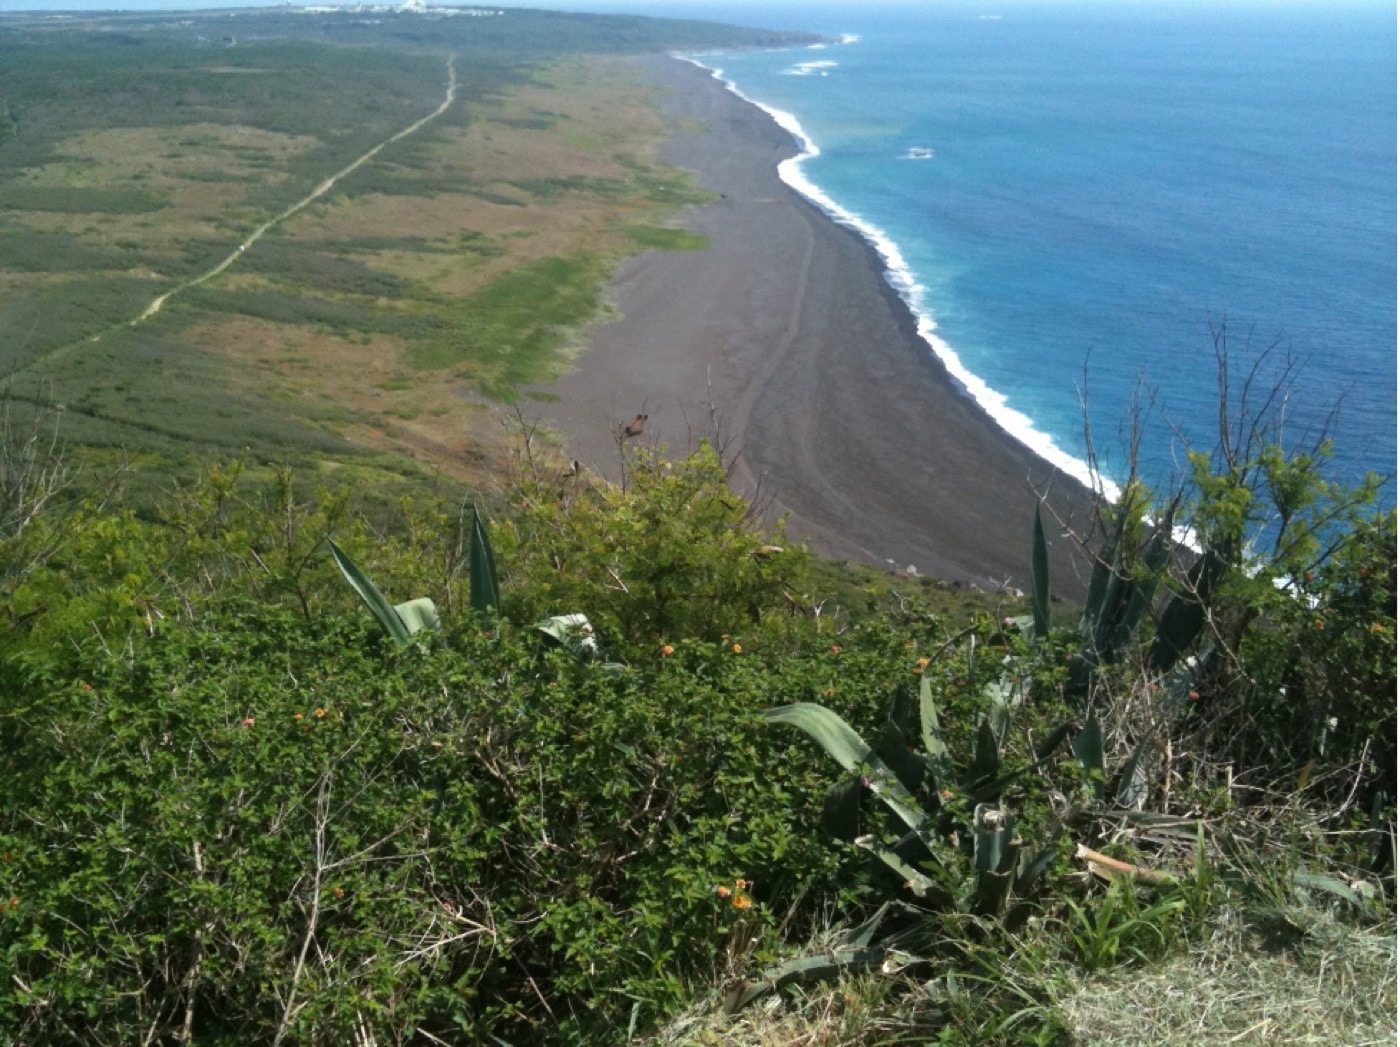 This is a modern day view of the invasion beaches from Mt. Suribachi on Iwo Jima. The United States Army Air Forces saw the island as being a good launching point for strategic bombing missions against the Empire of Japan. U.S. Navy Seabee construction battalions would later repair and upgrade the island's airports to support the US allies of World War II. After the attack on Pearl Harbor, the Imperial Japanese Navy fought a largely defensive battle until the war's end.